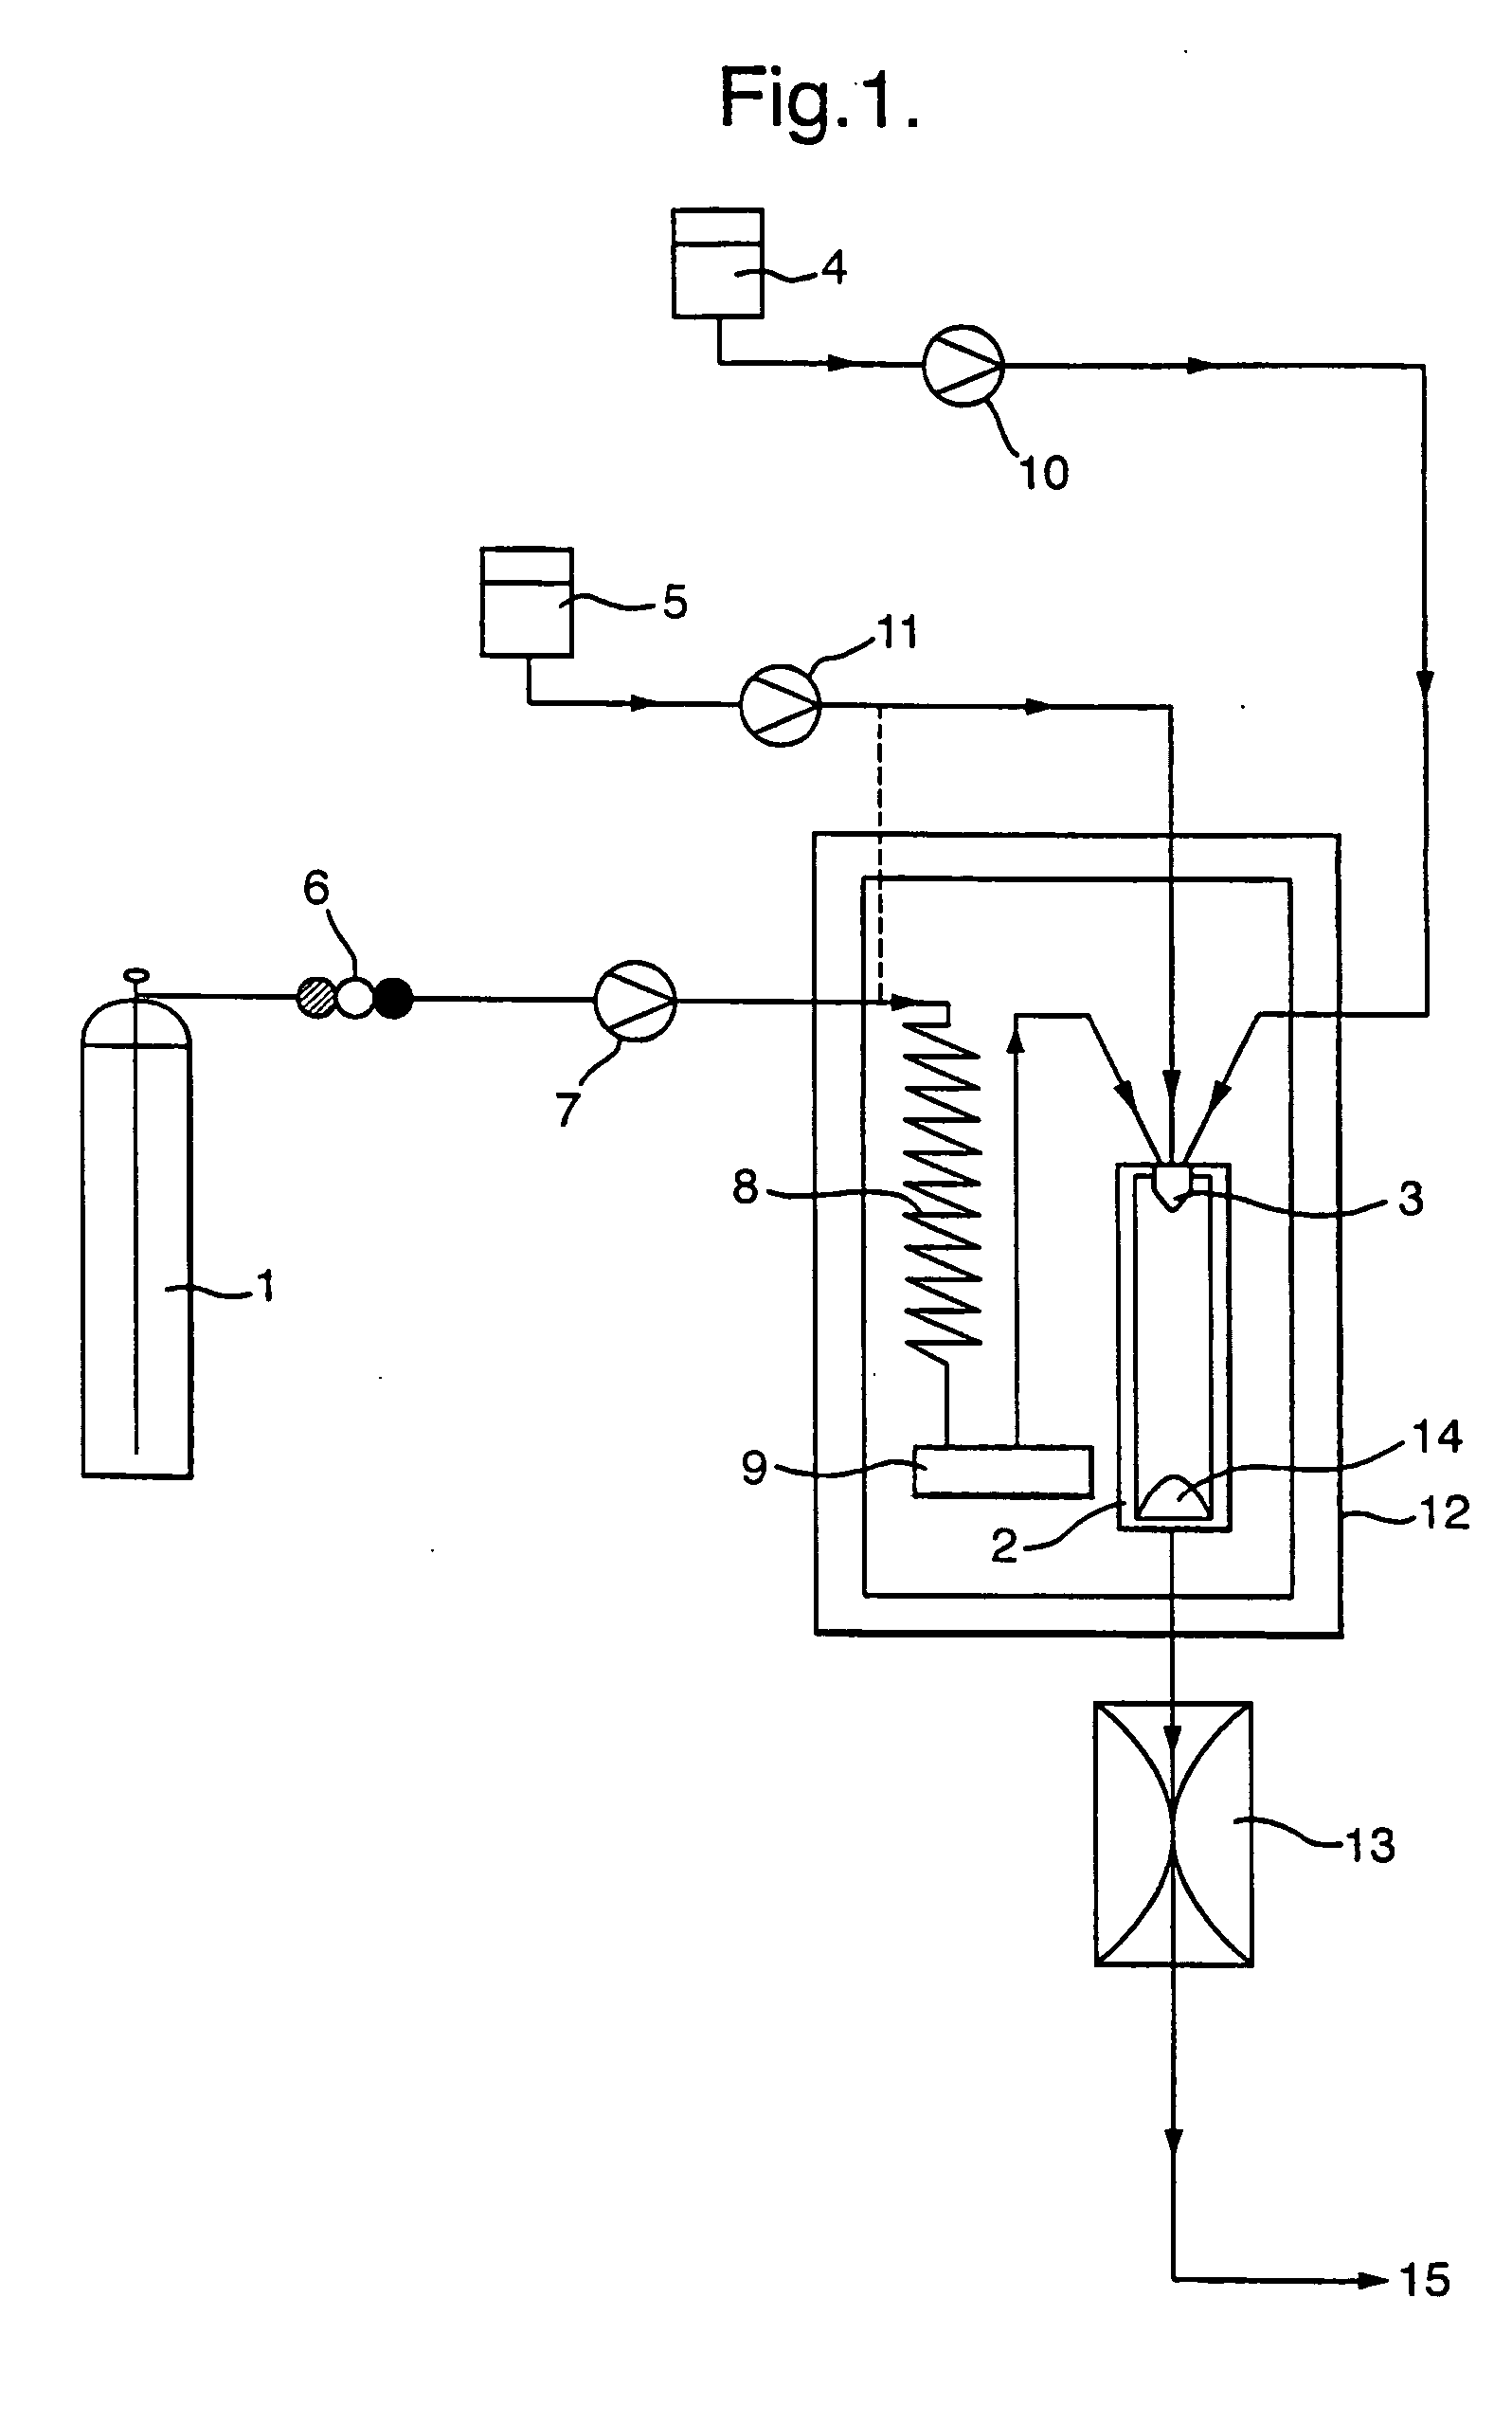 Method of particle formation